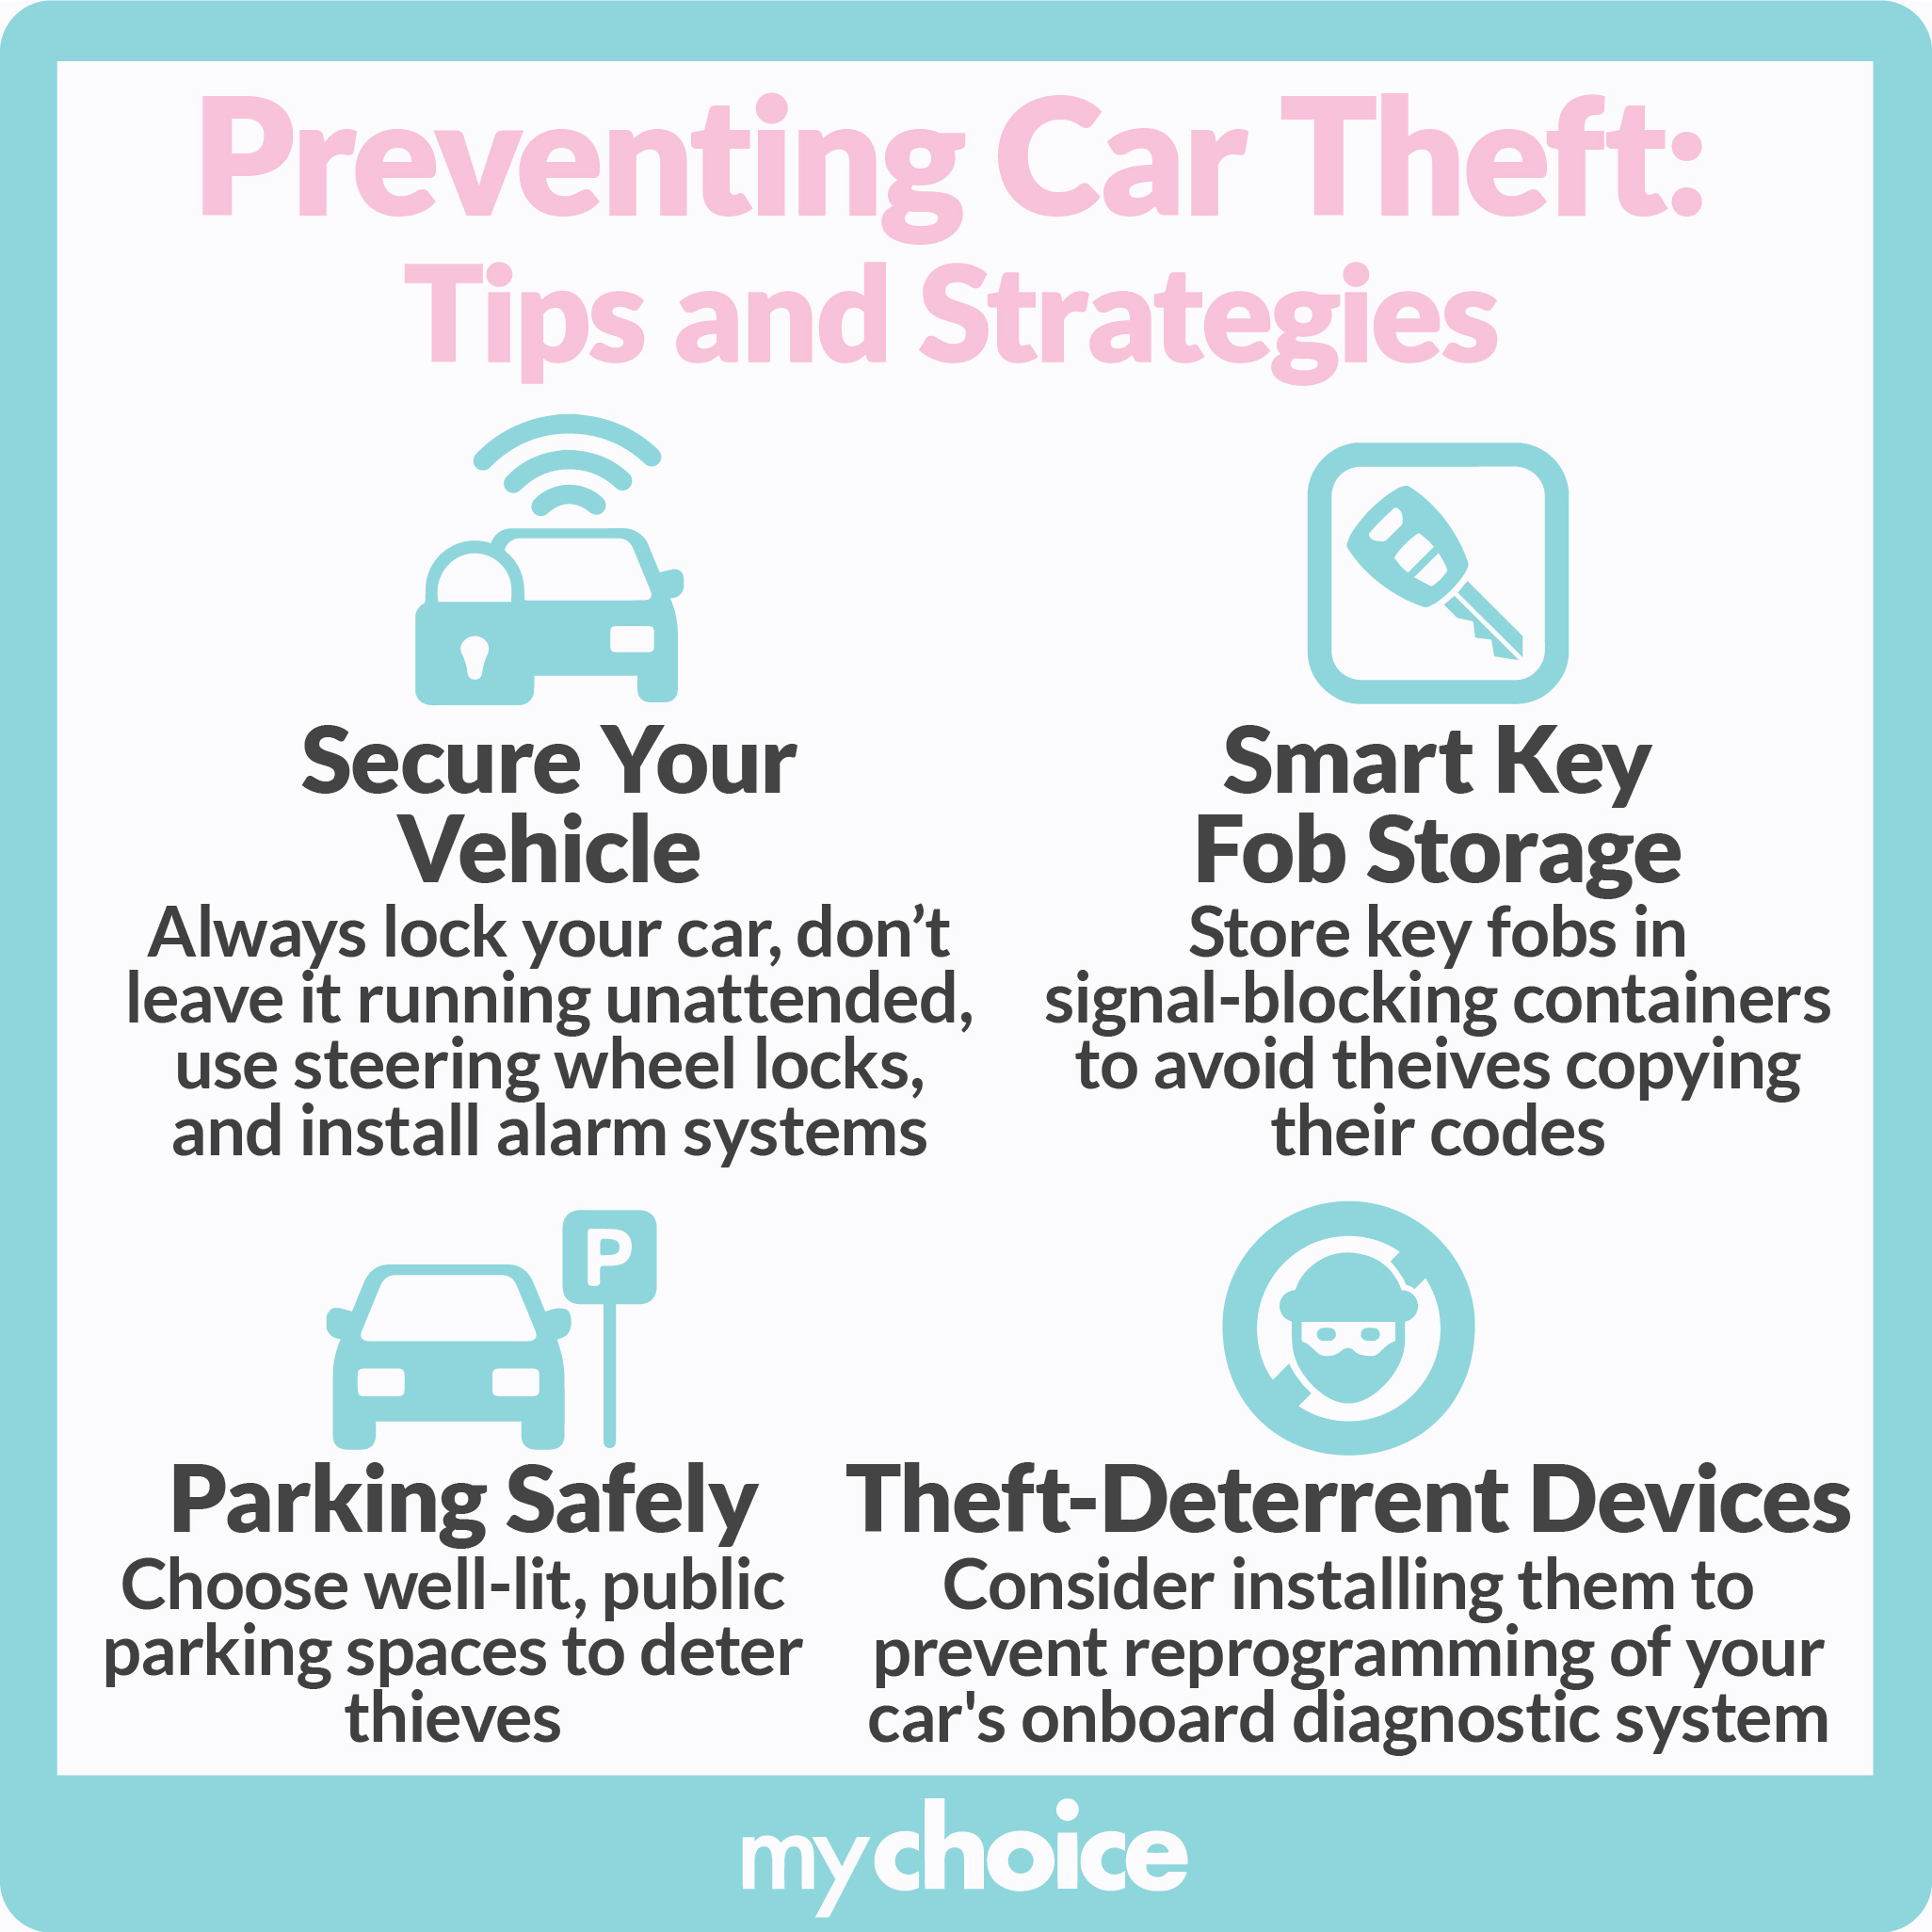 Preventing car theft: tips and strategies